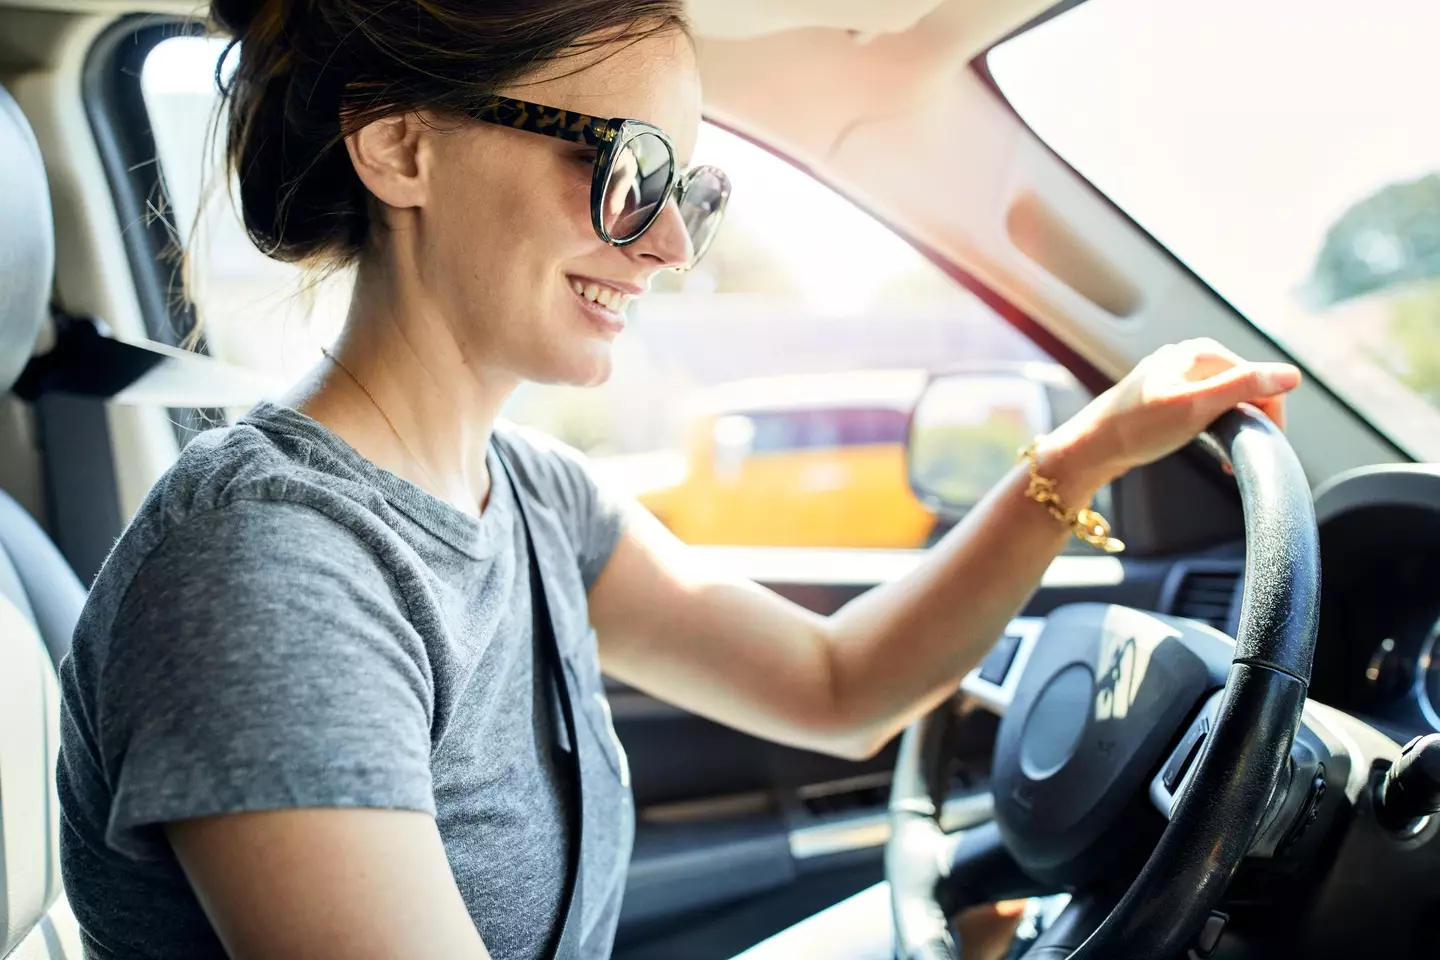 Make sure your sunglasses are legal to wear while driving before setting off. (Getty Stock Images)